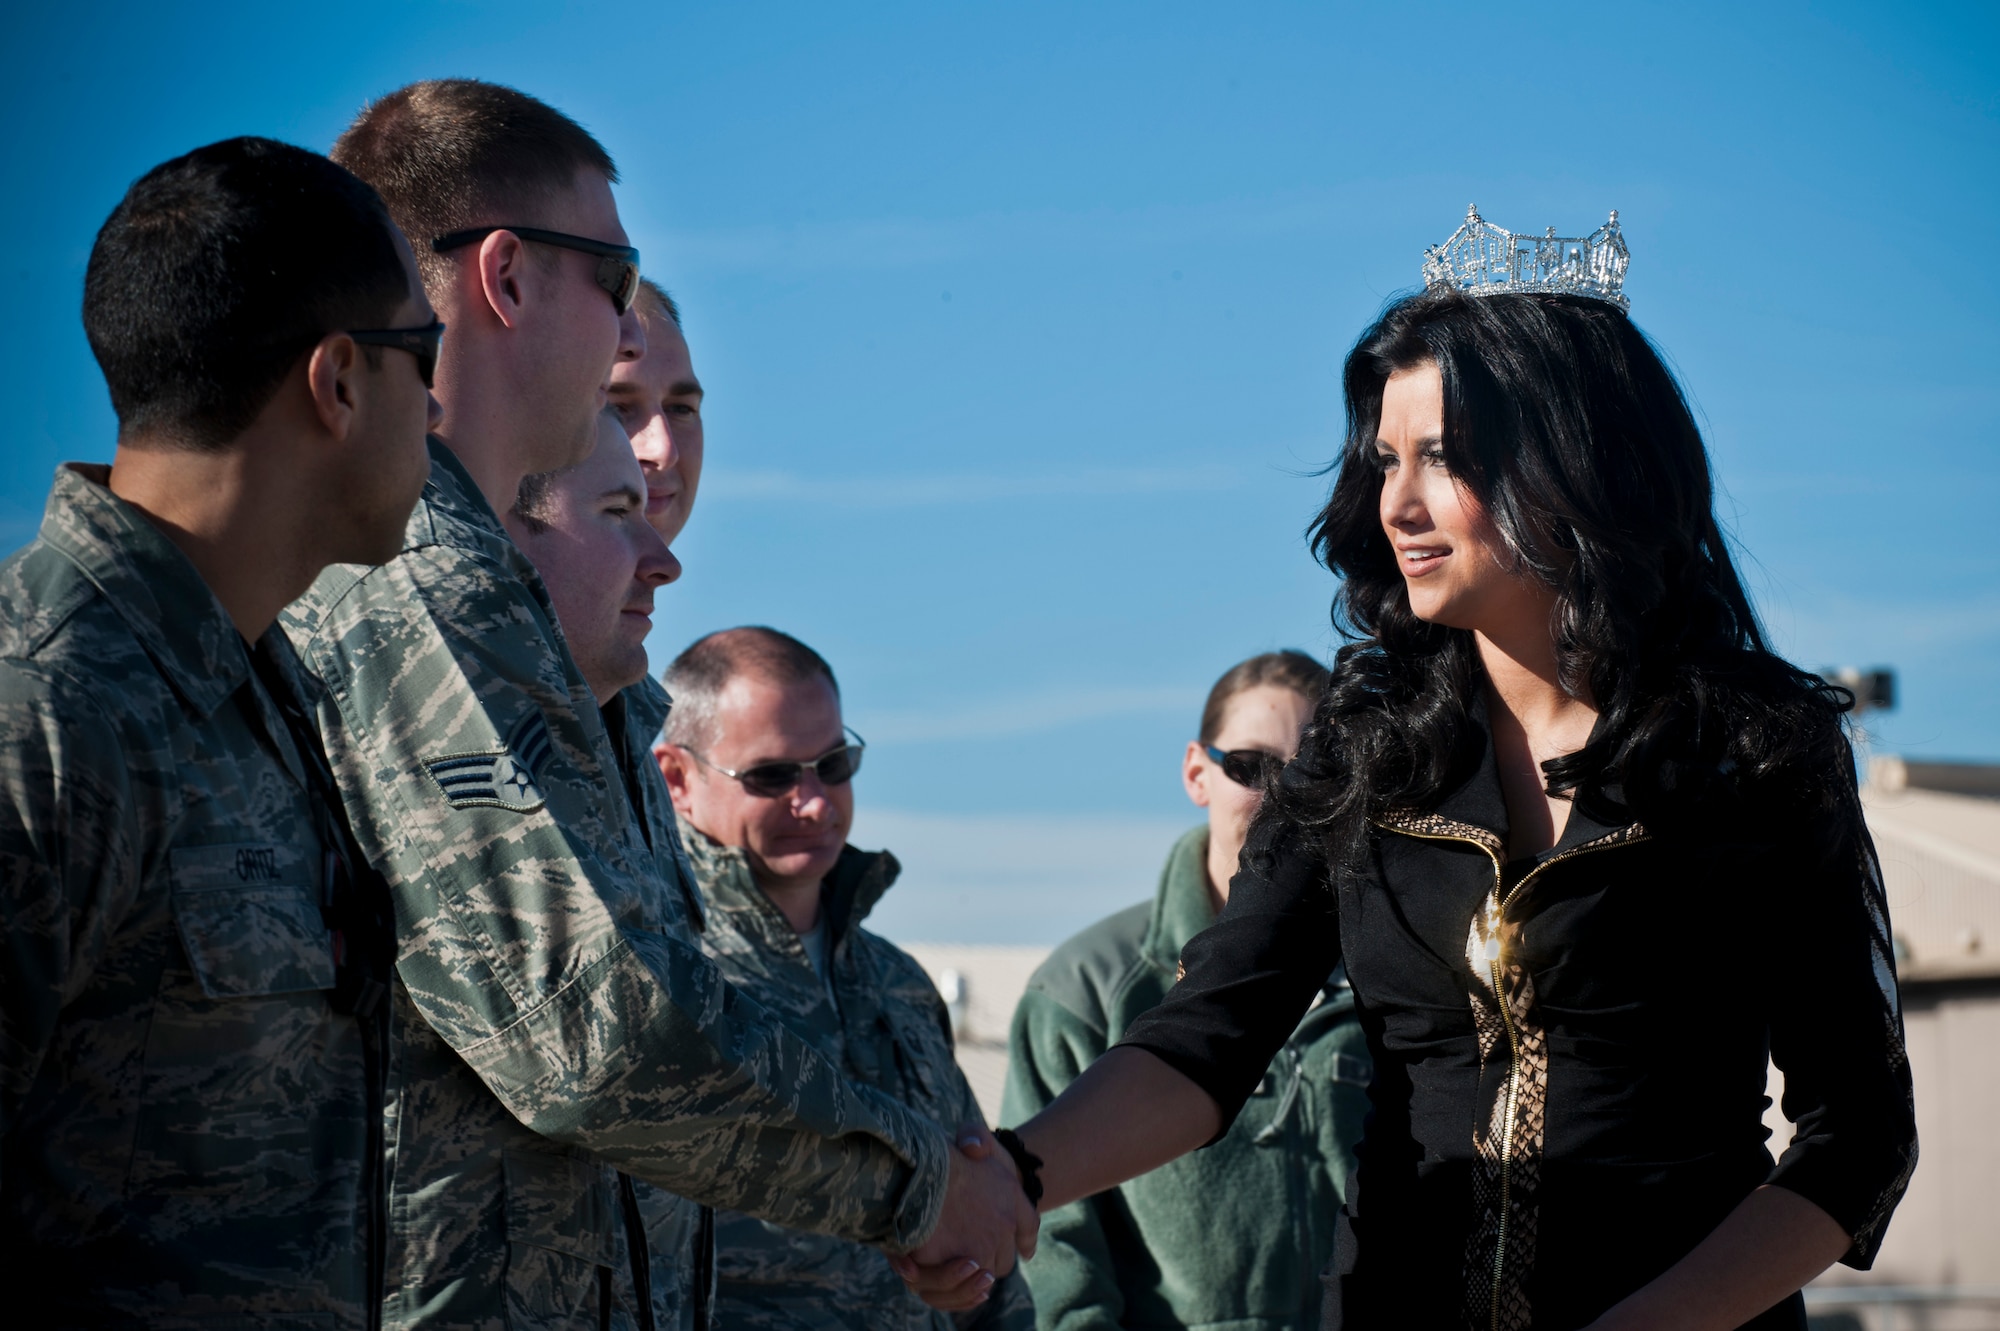 Laura Kaeppeler, Miss America 2012, thanks Airmen for their service during a tour, Jan. 8, 2013, at Nellis Air Force Base, Nev. During the visit, Kaeppeler visited the Child Development Center, Thunderbirds Hangar, a static F-22 Raptor display, and the Dining Facility where she signed autographs and took photos with Airmen. (U.S. Air Force Photo by Airman 1st Class Jason Couillard)